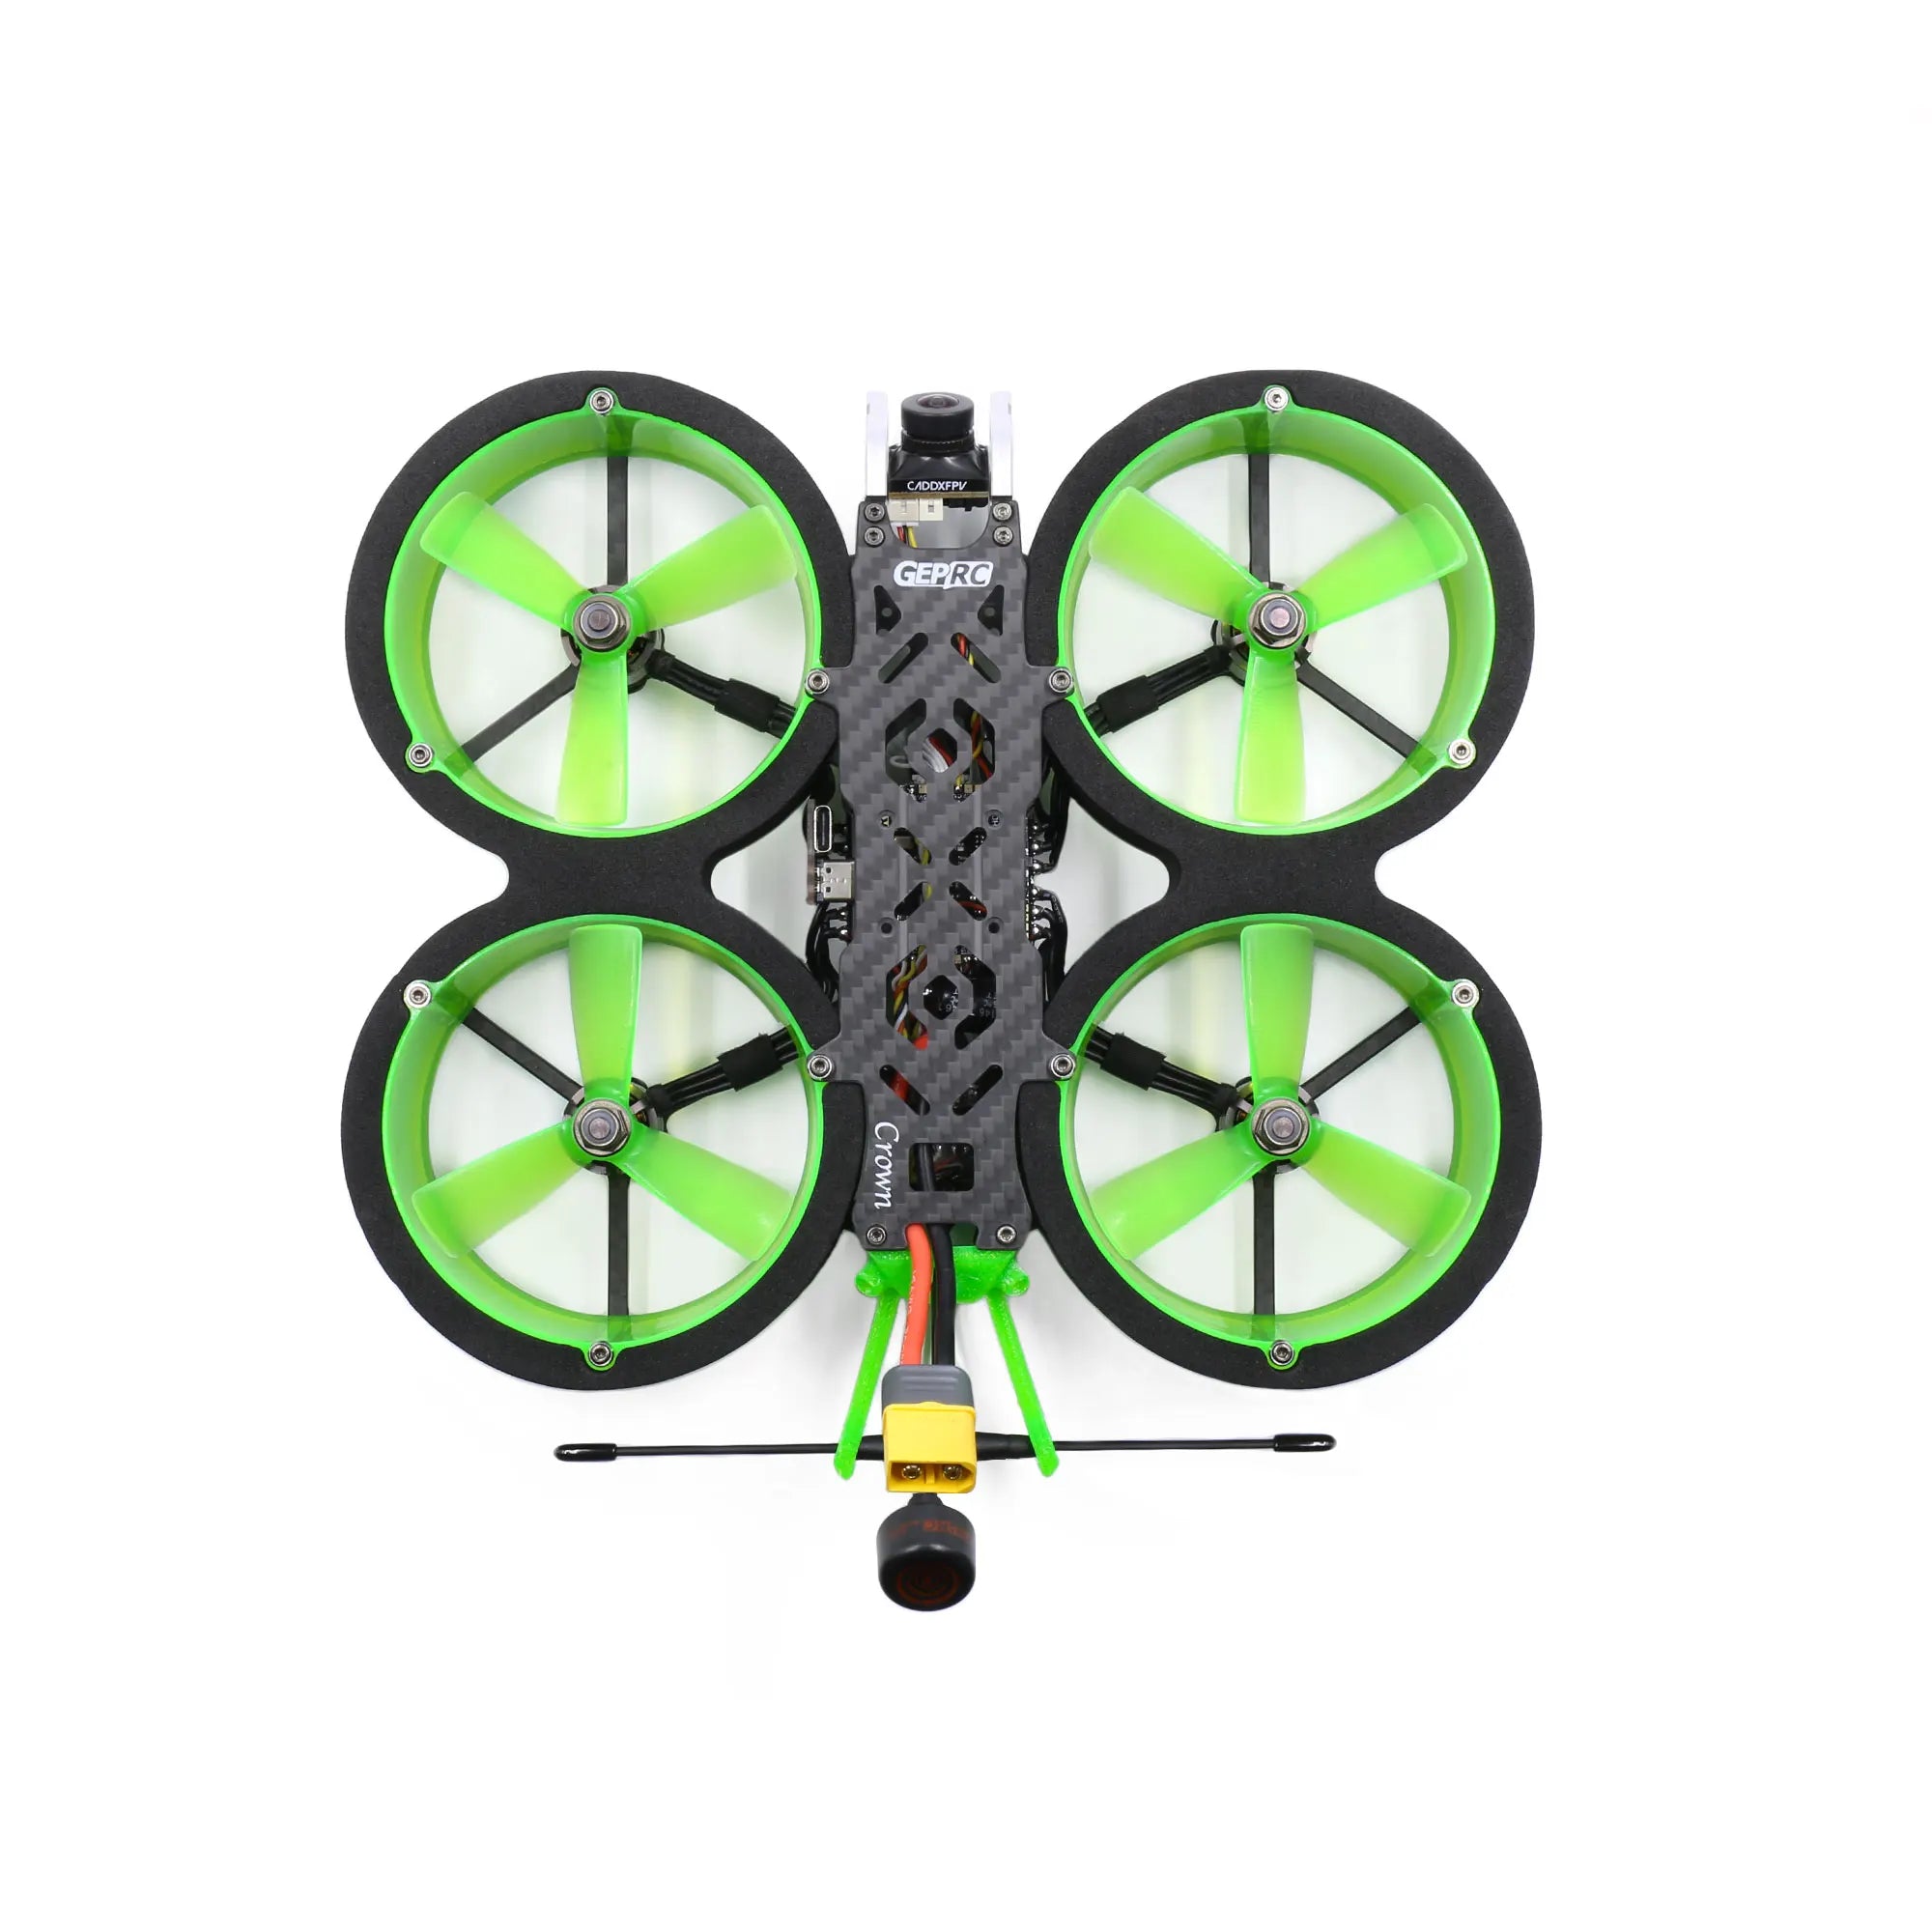 GEPRC Crown Analog Cinewhoop FPV Drone, Ensure compatibility and follow the manufacturer's guidelines when choosing and installing a new camera